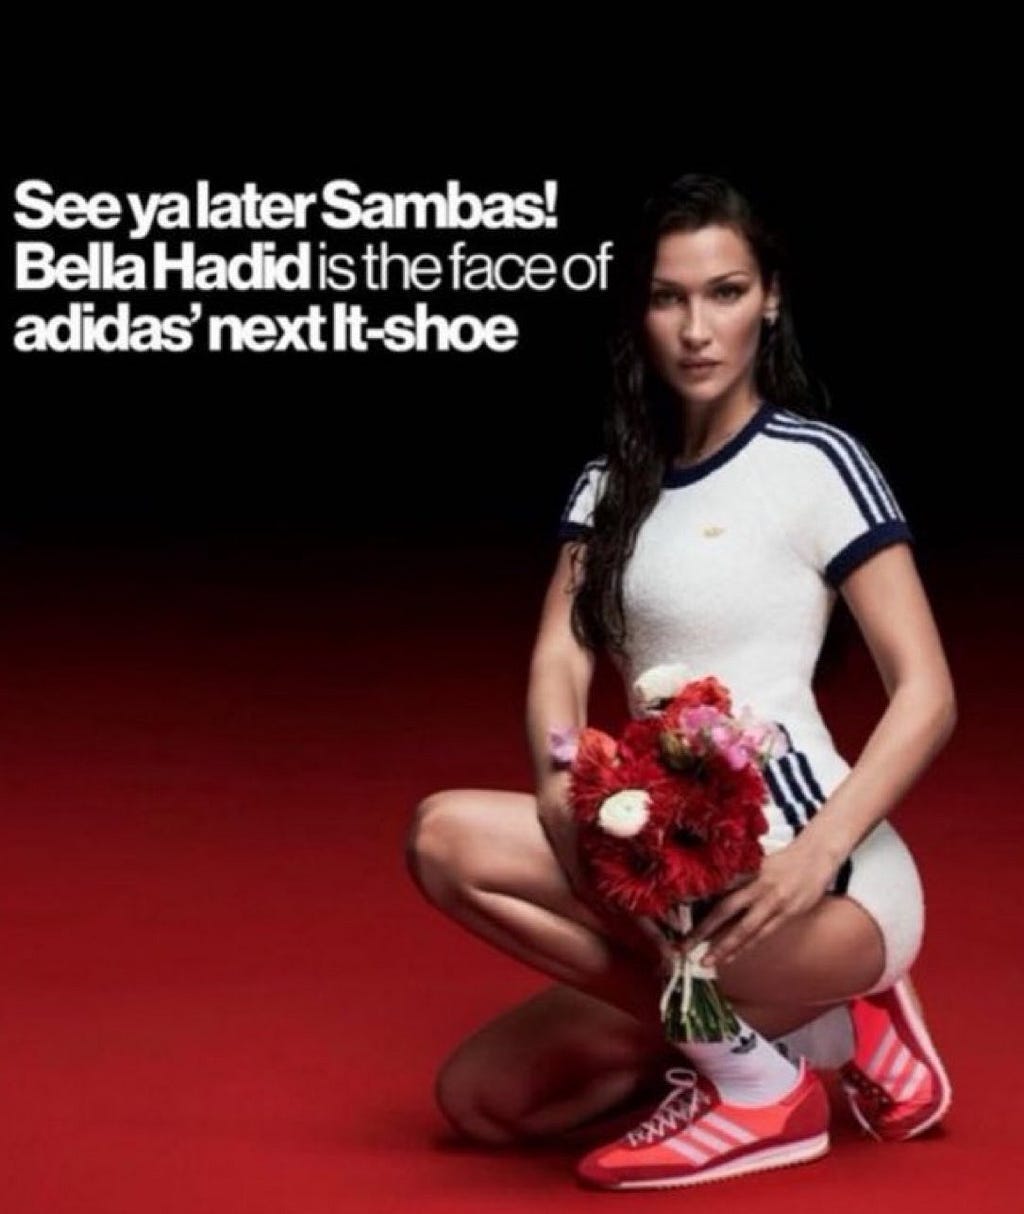 Model promoting Adidas' new It-shoe, holding a bouquet of flowers, wearing a white and blue outfit with red Adidas sneakers.